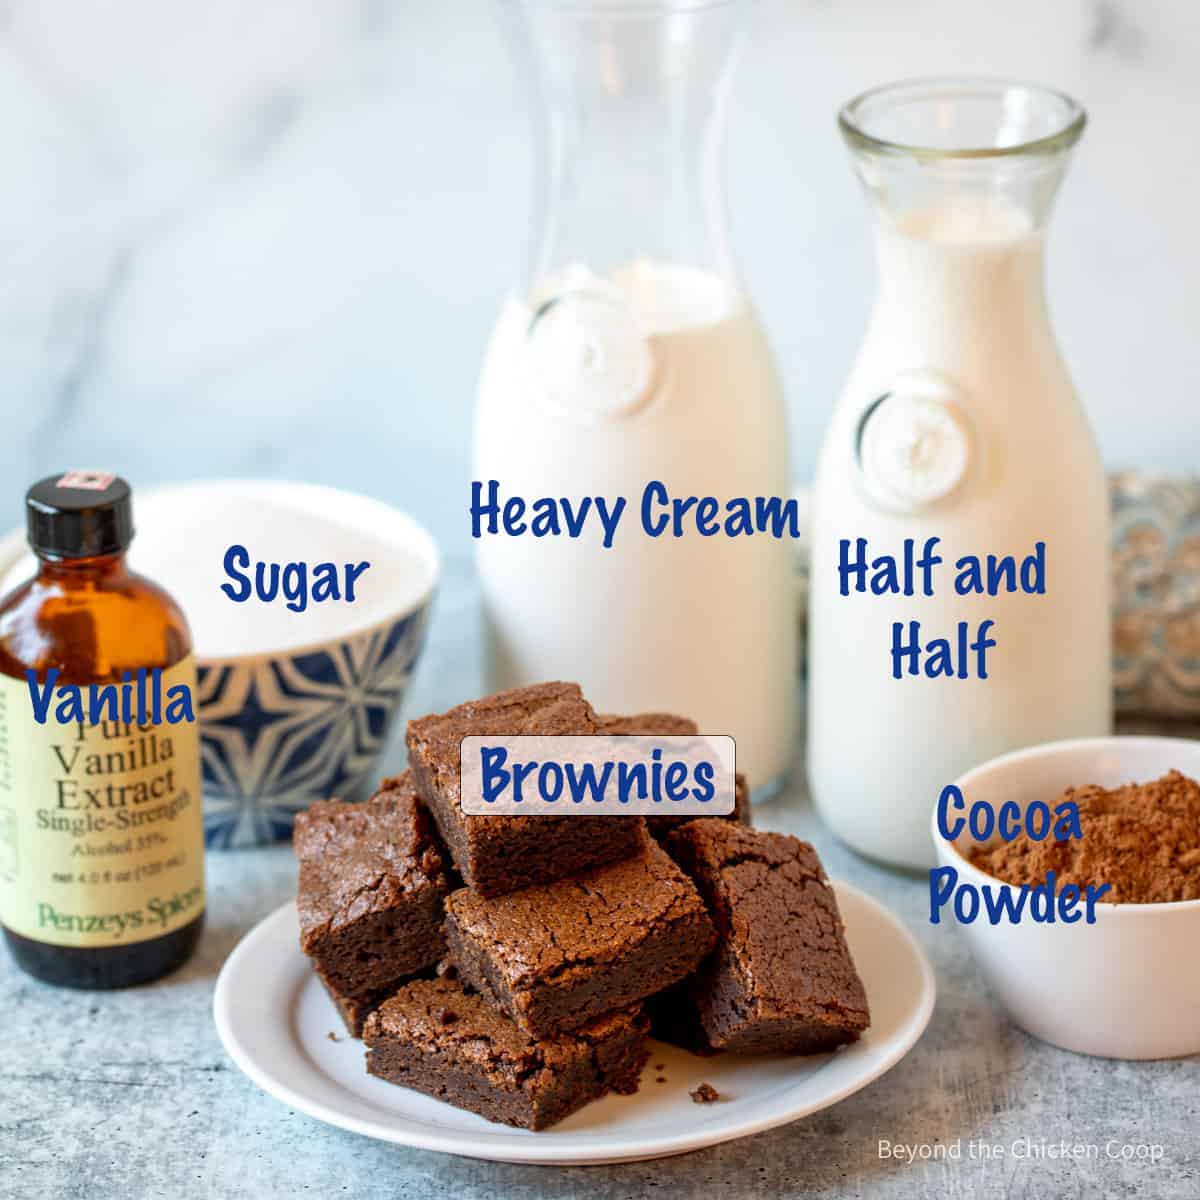 Ingredients for making brownie ice cream.